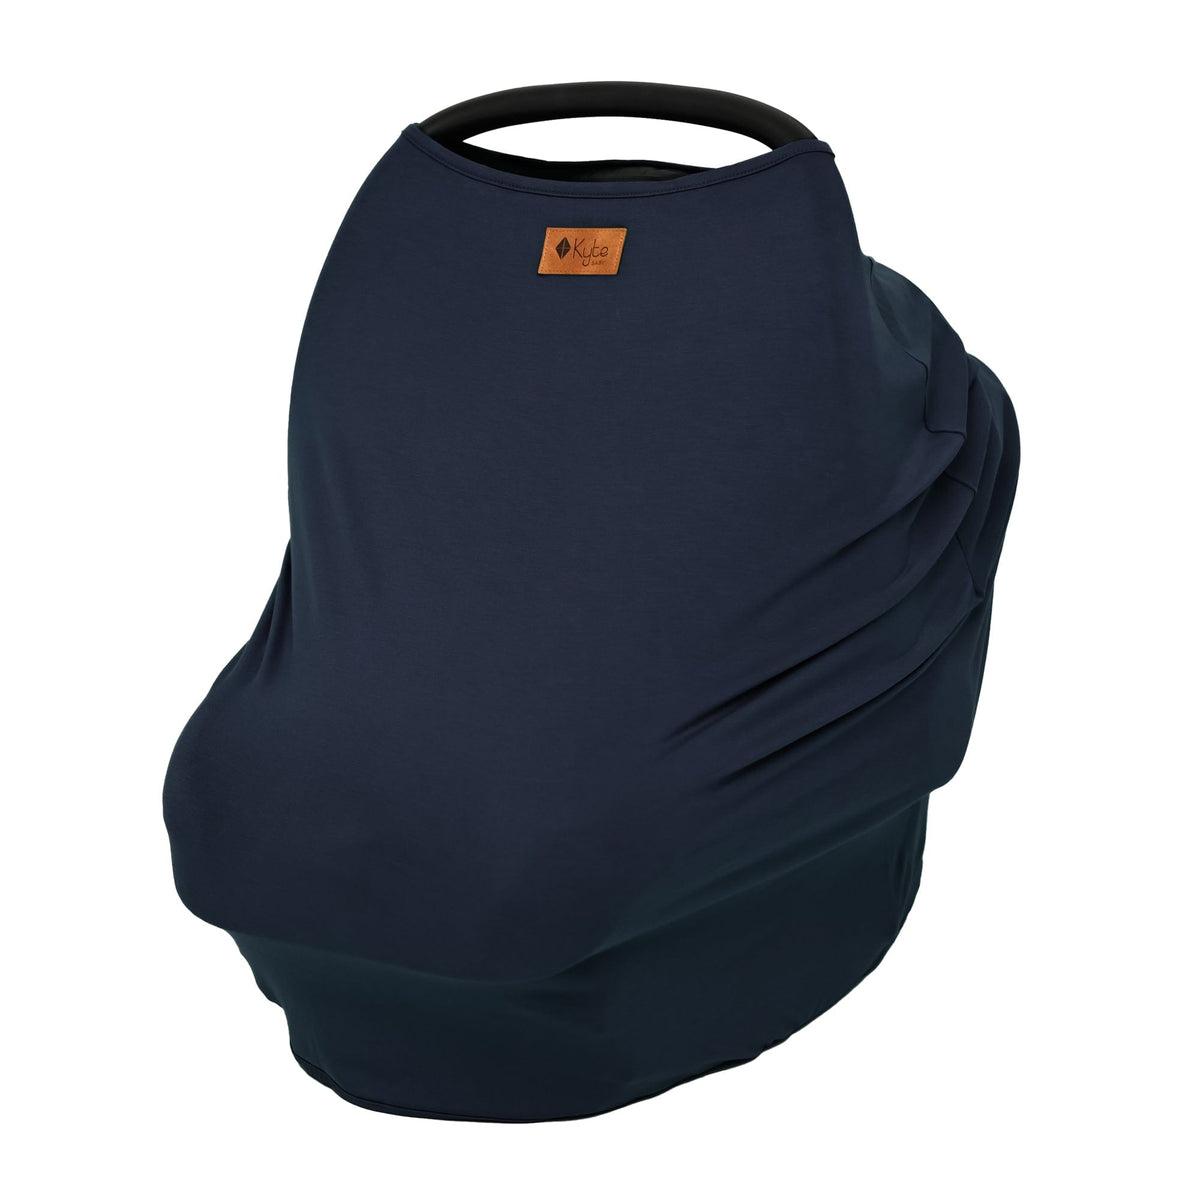 Kyte BABY Car Seat Cover Navy Car Seat Cover in Navy